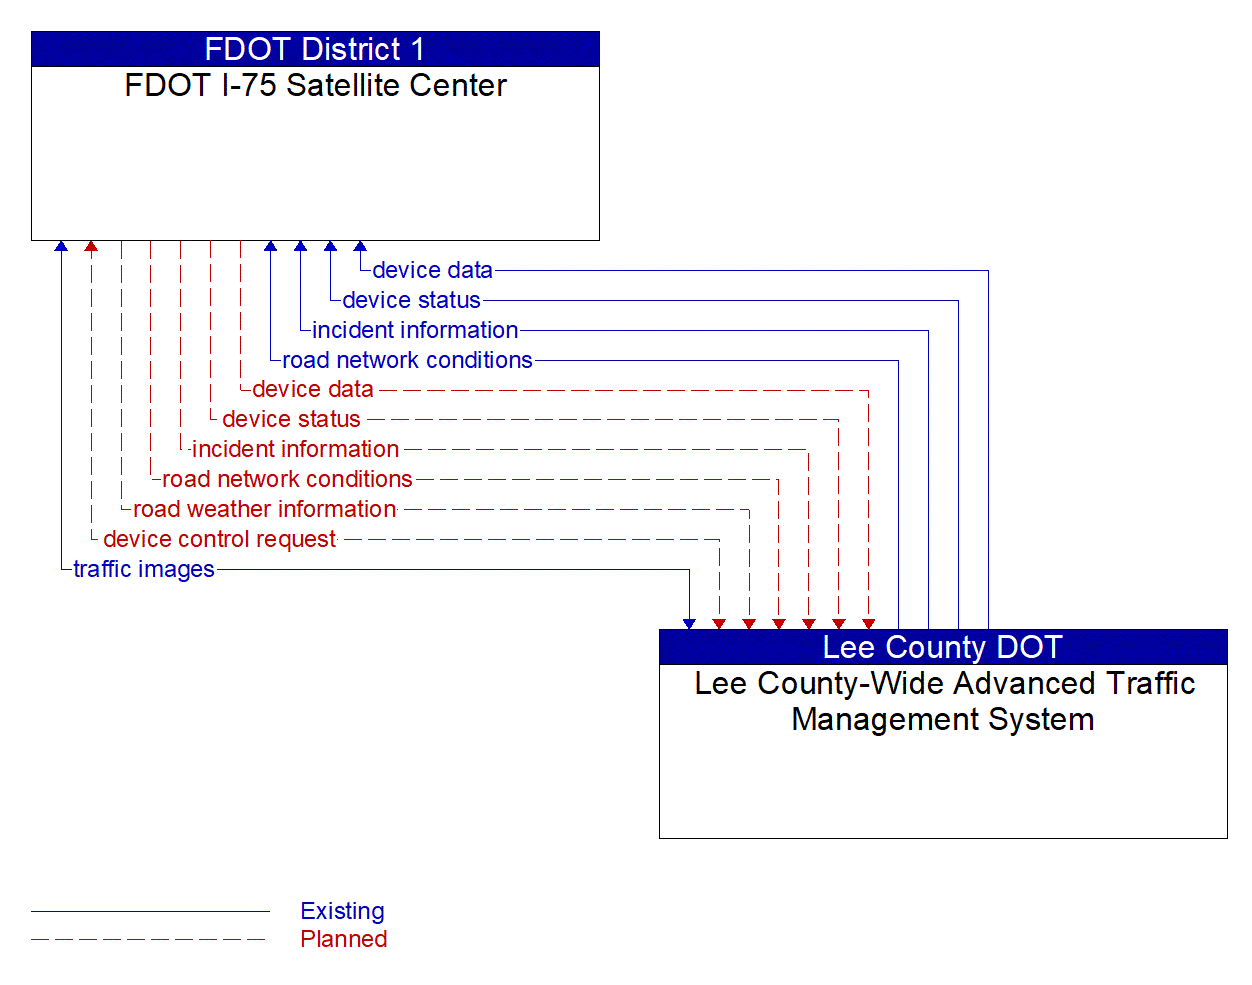 Architecture Flow Diagram: Lee County-Wide Advanced Traffic Management System <--> FDOT I-75 Satellite Center